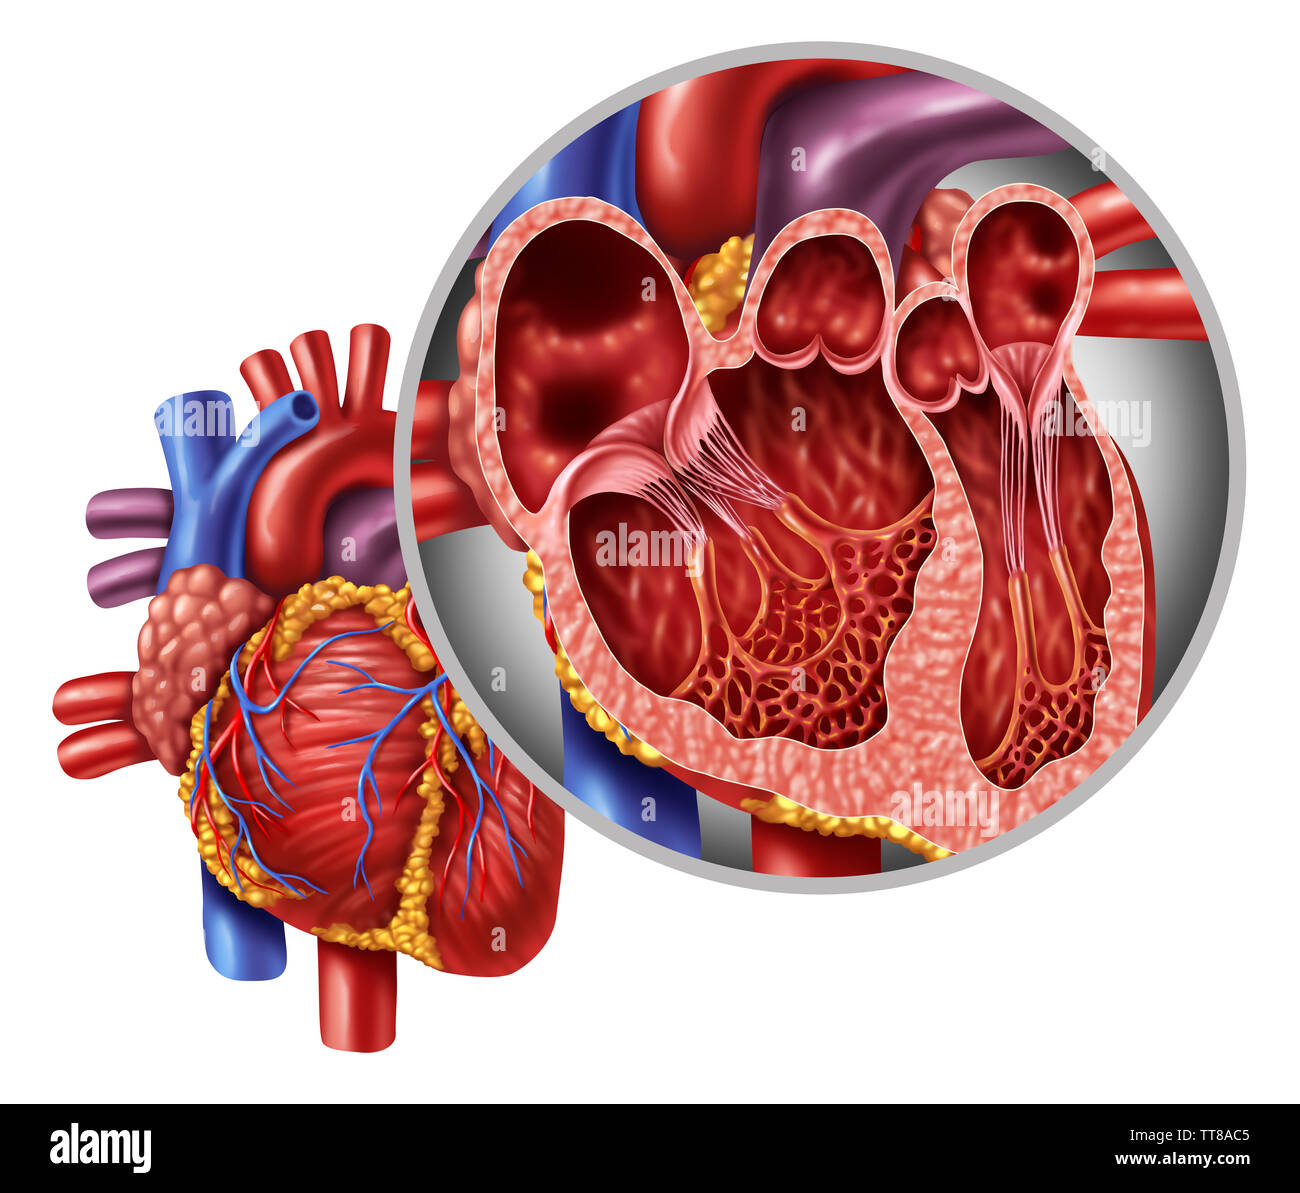 Human heart anatomy close up diagram concept from a healthy body isolated on white background as a medical health care symbol. Stock Photo